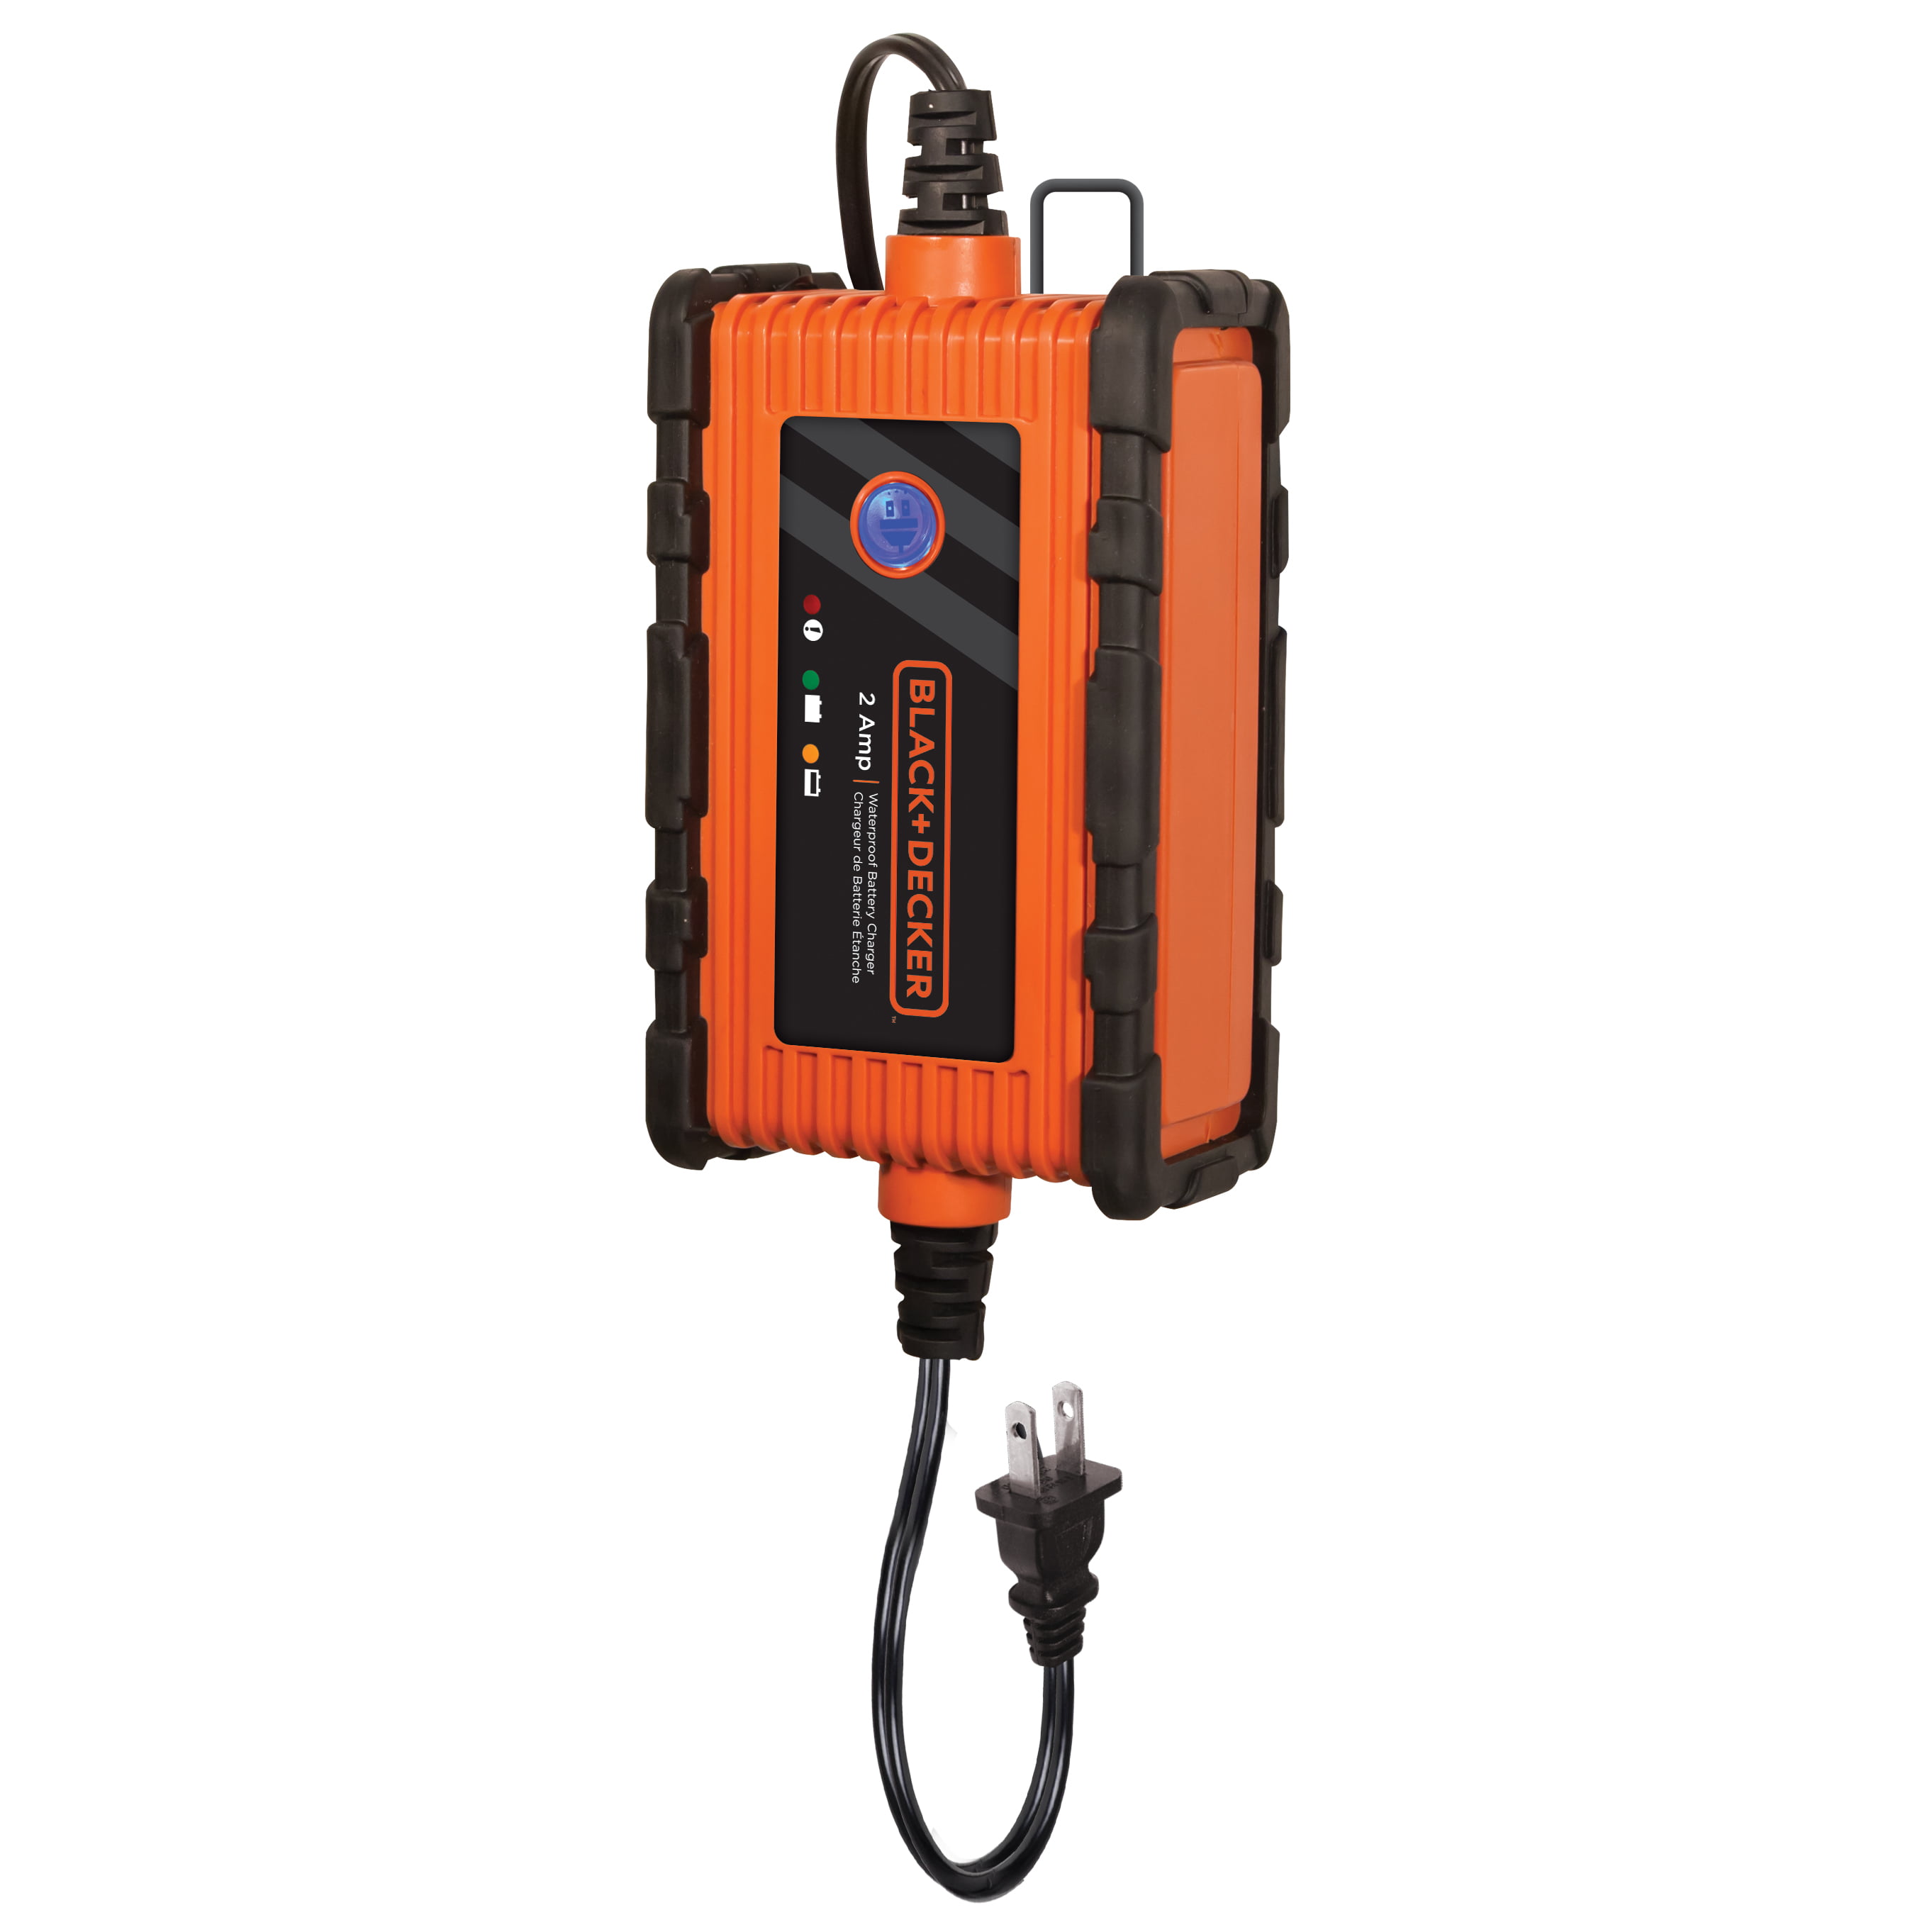  BLACK+DECKER BC2WBD Fully Automatic 2 Amp 12V Waterproof Battery  Charger/Maintainer with Cable Clamps : Automotive